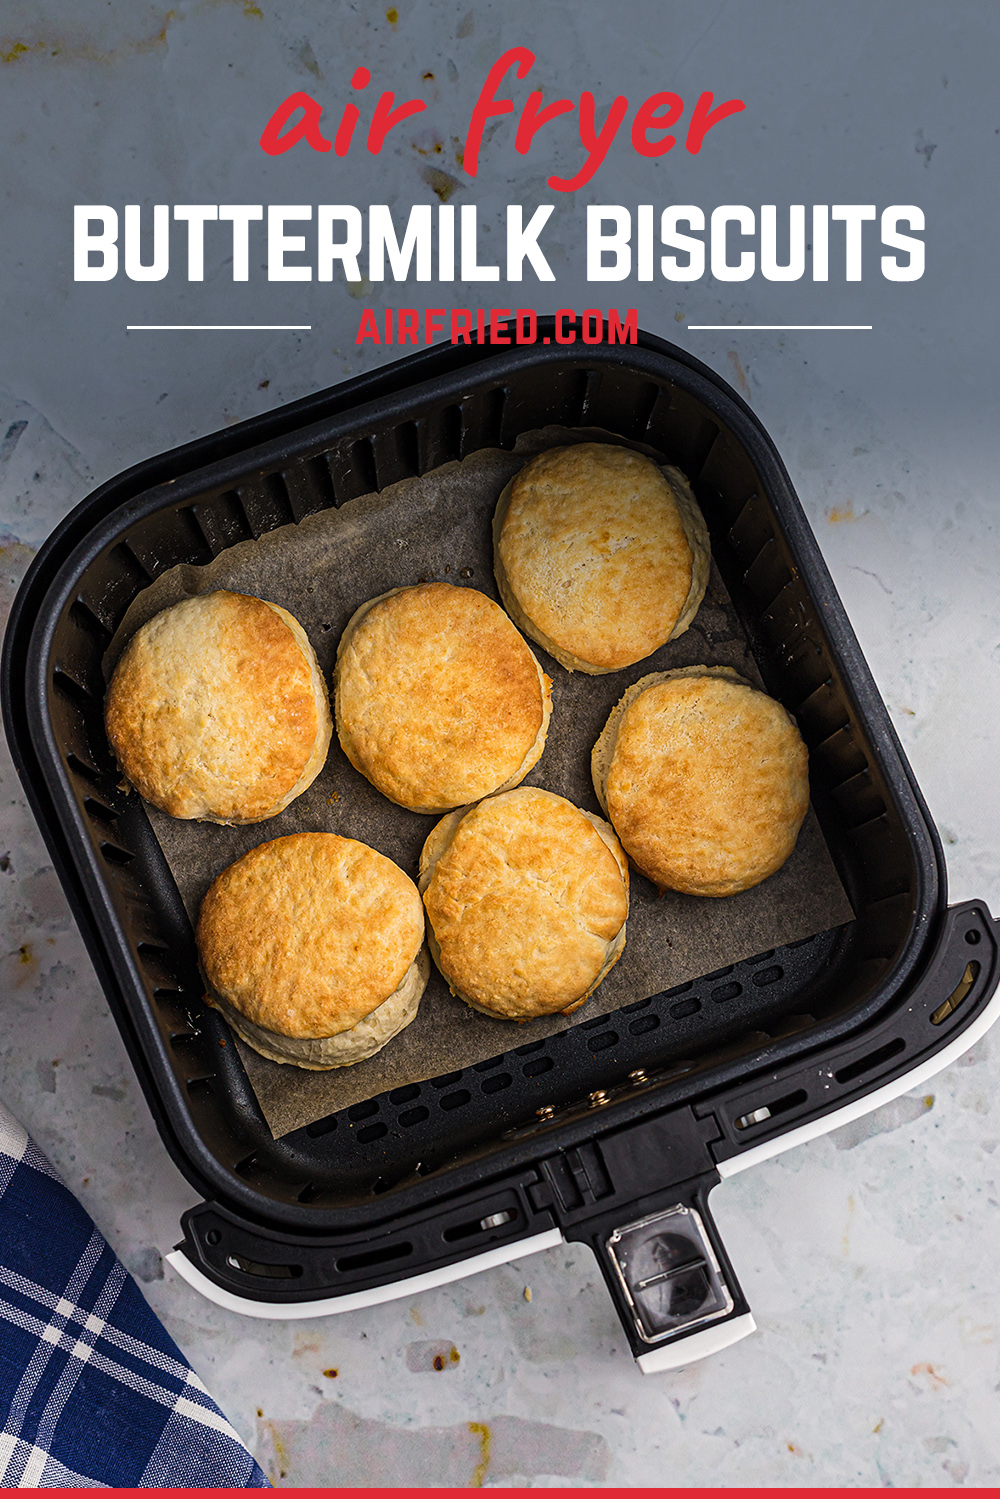 If you love homemade buttermilk biscuits you will love cooking them in the air fryer! #airfried #easybiscuits #recipes